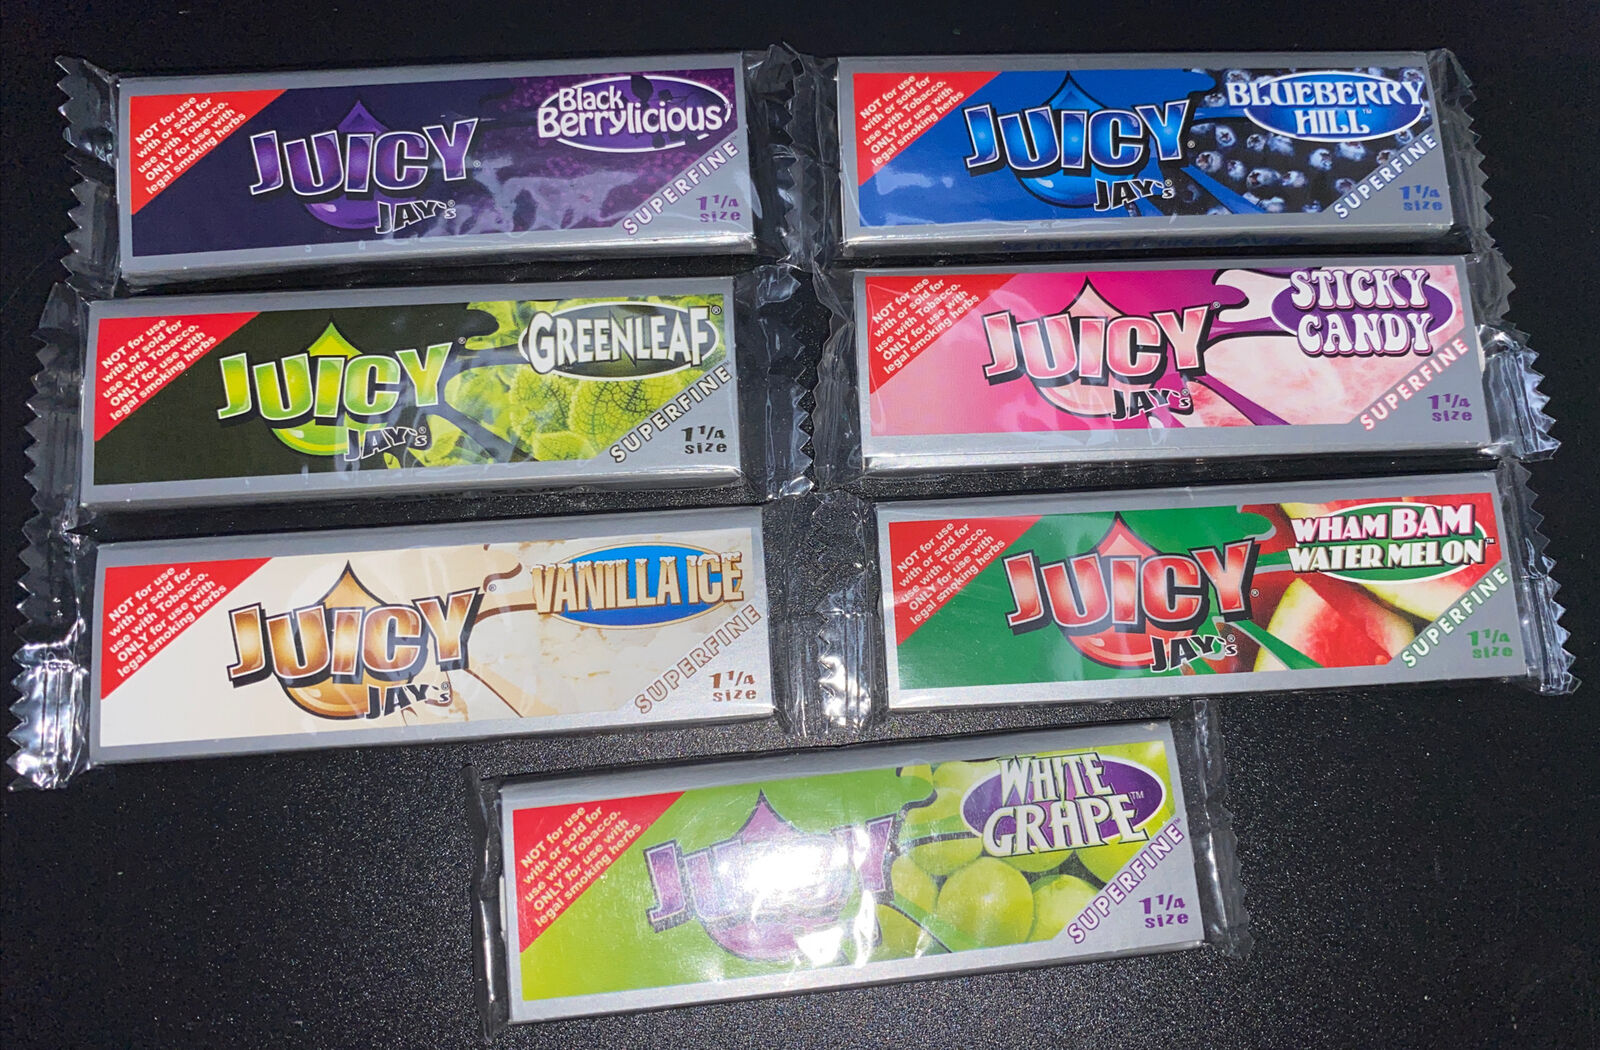 Juicy Jay’s 1 1/4 Rolling Papers Variety  Sampler 7 Pack (The Super Fine)